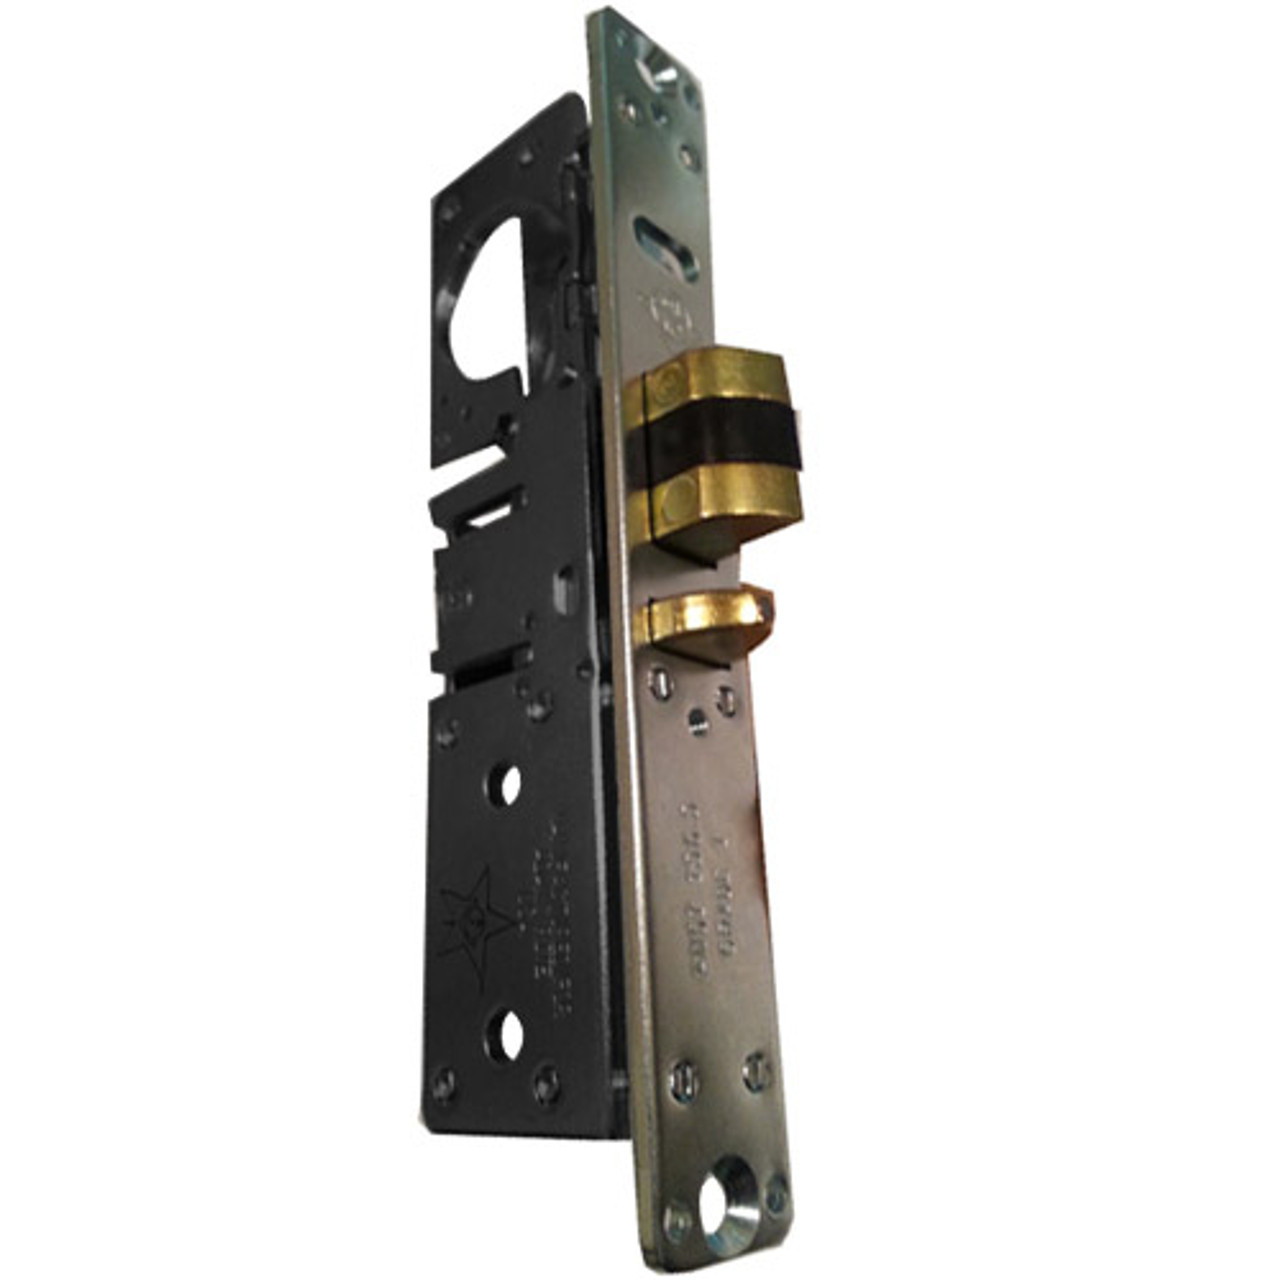 4511W-25-102-335 Adams Rite Standard Deadlatch with Radius Faceplate with weatherstrip in Black Anodized Finish